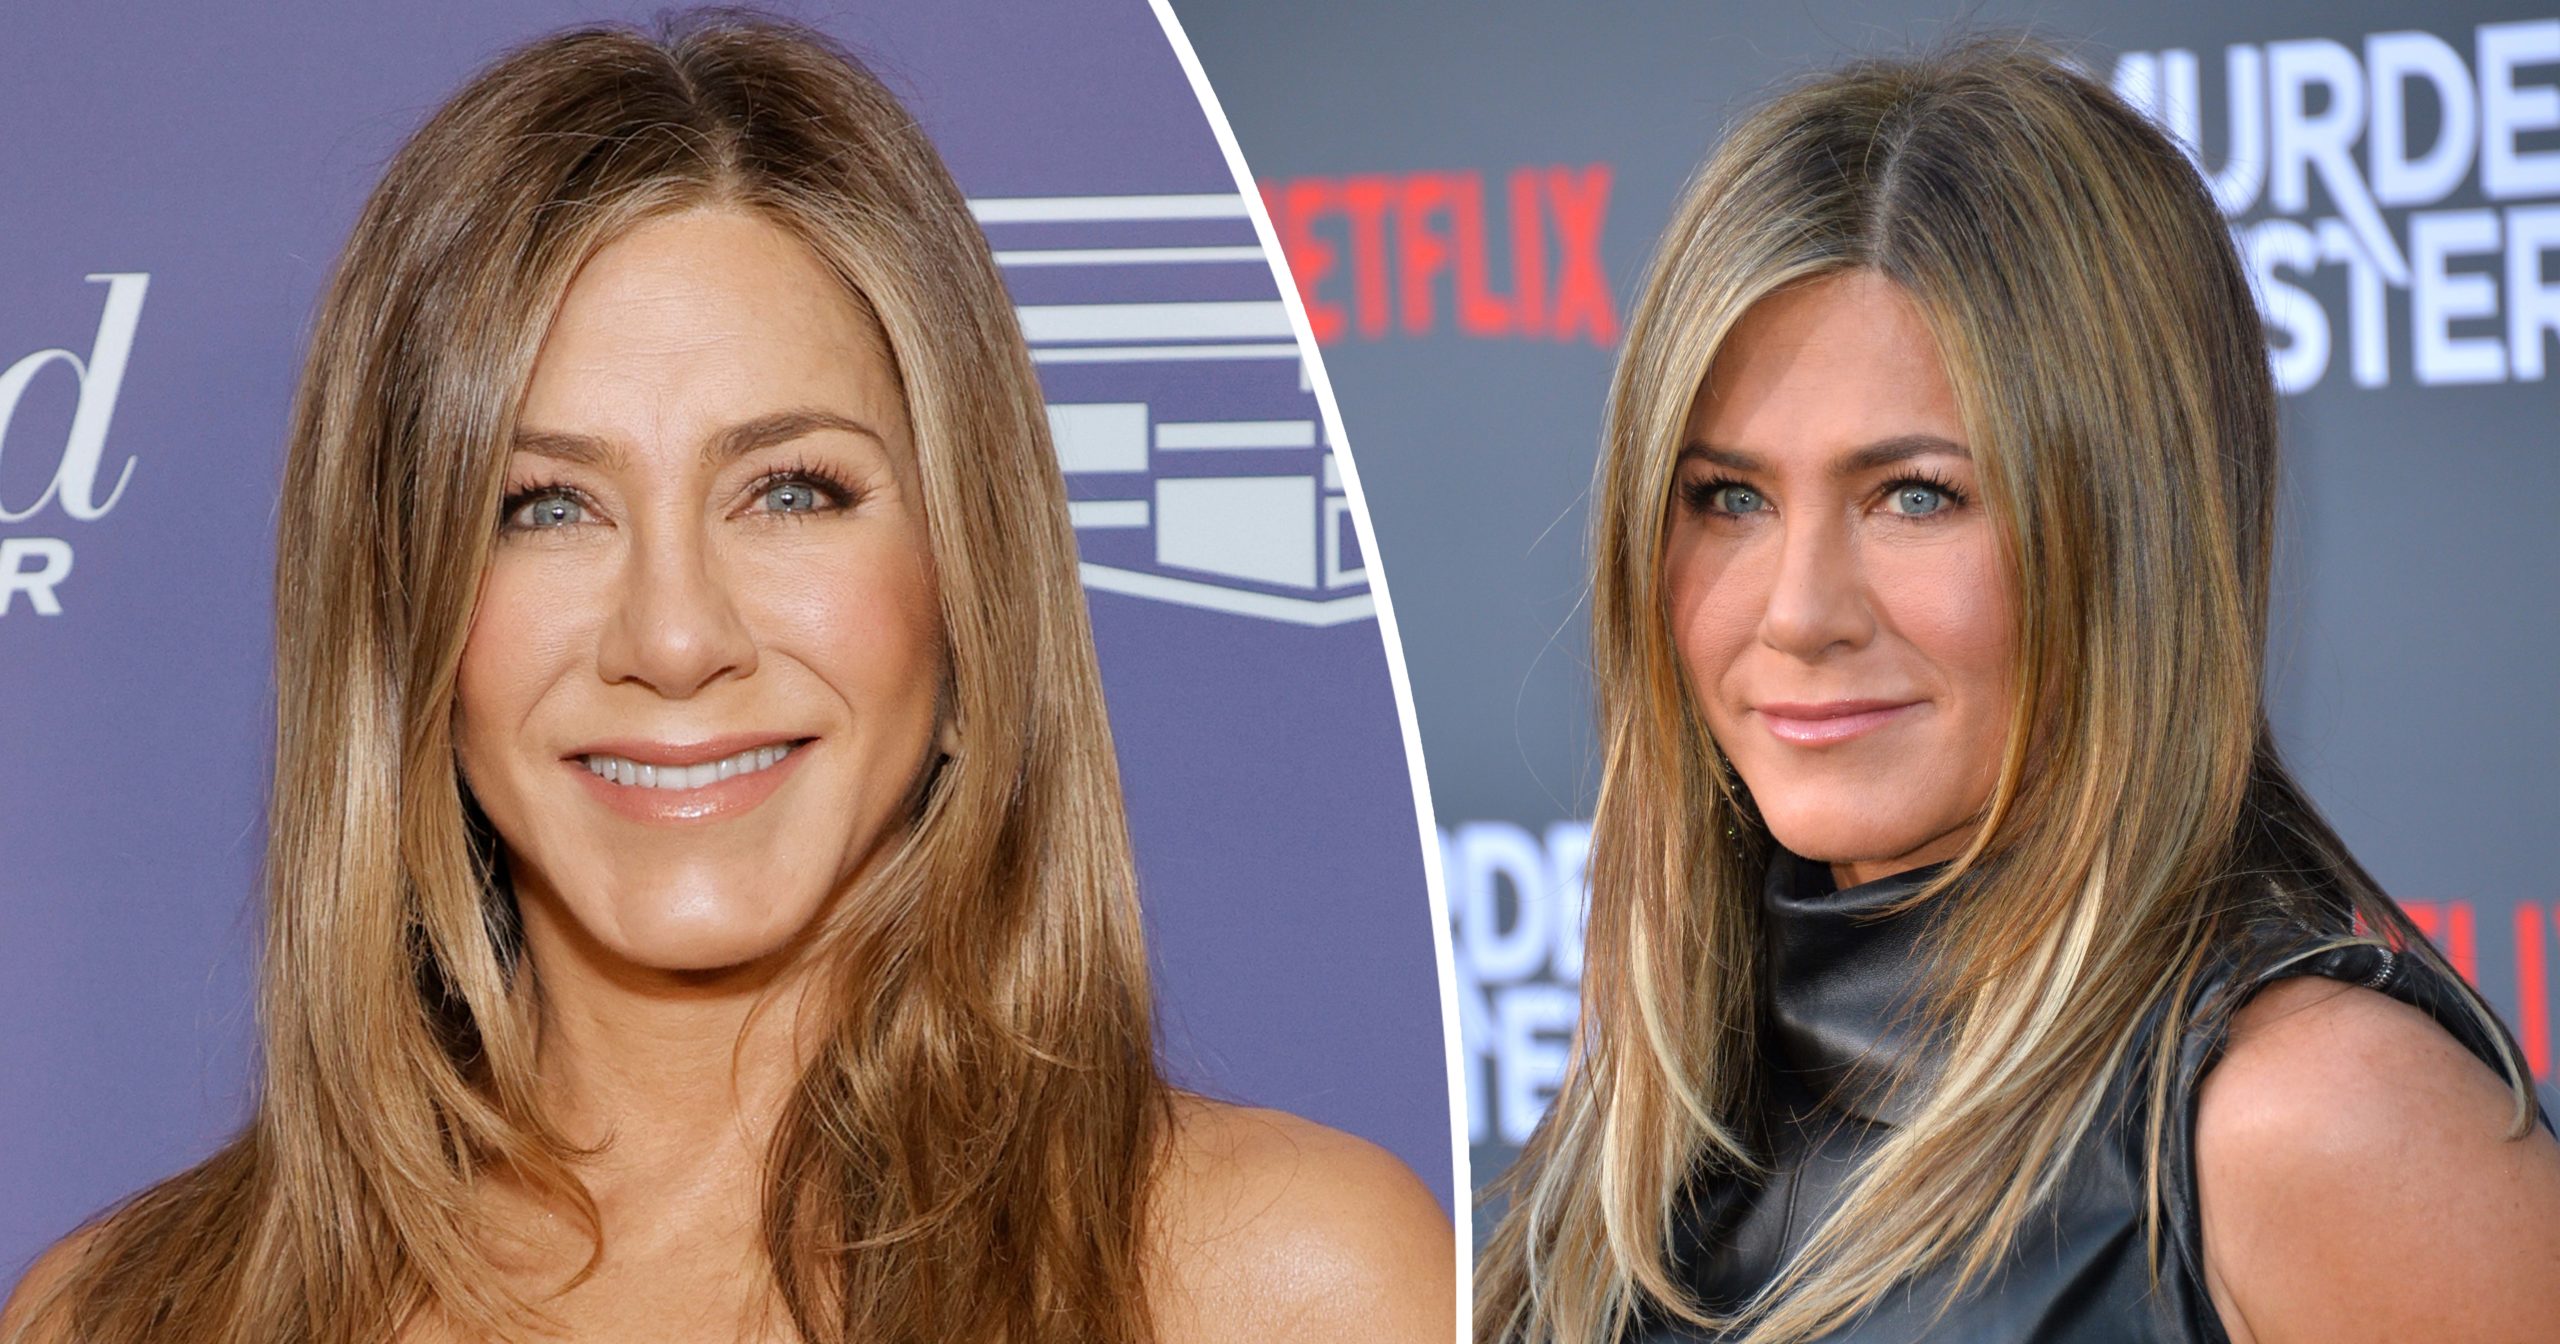 Did Jennifer Aniston Get a Plastic Surgery? The Facts Behind The Rumors